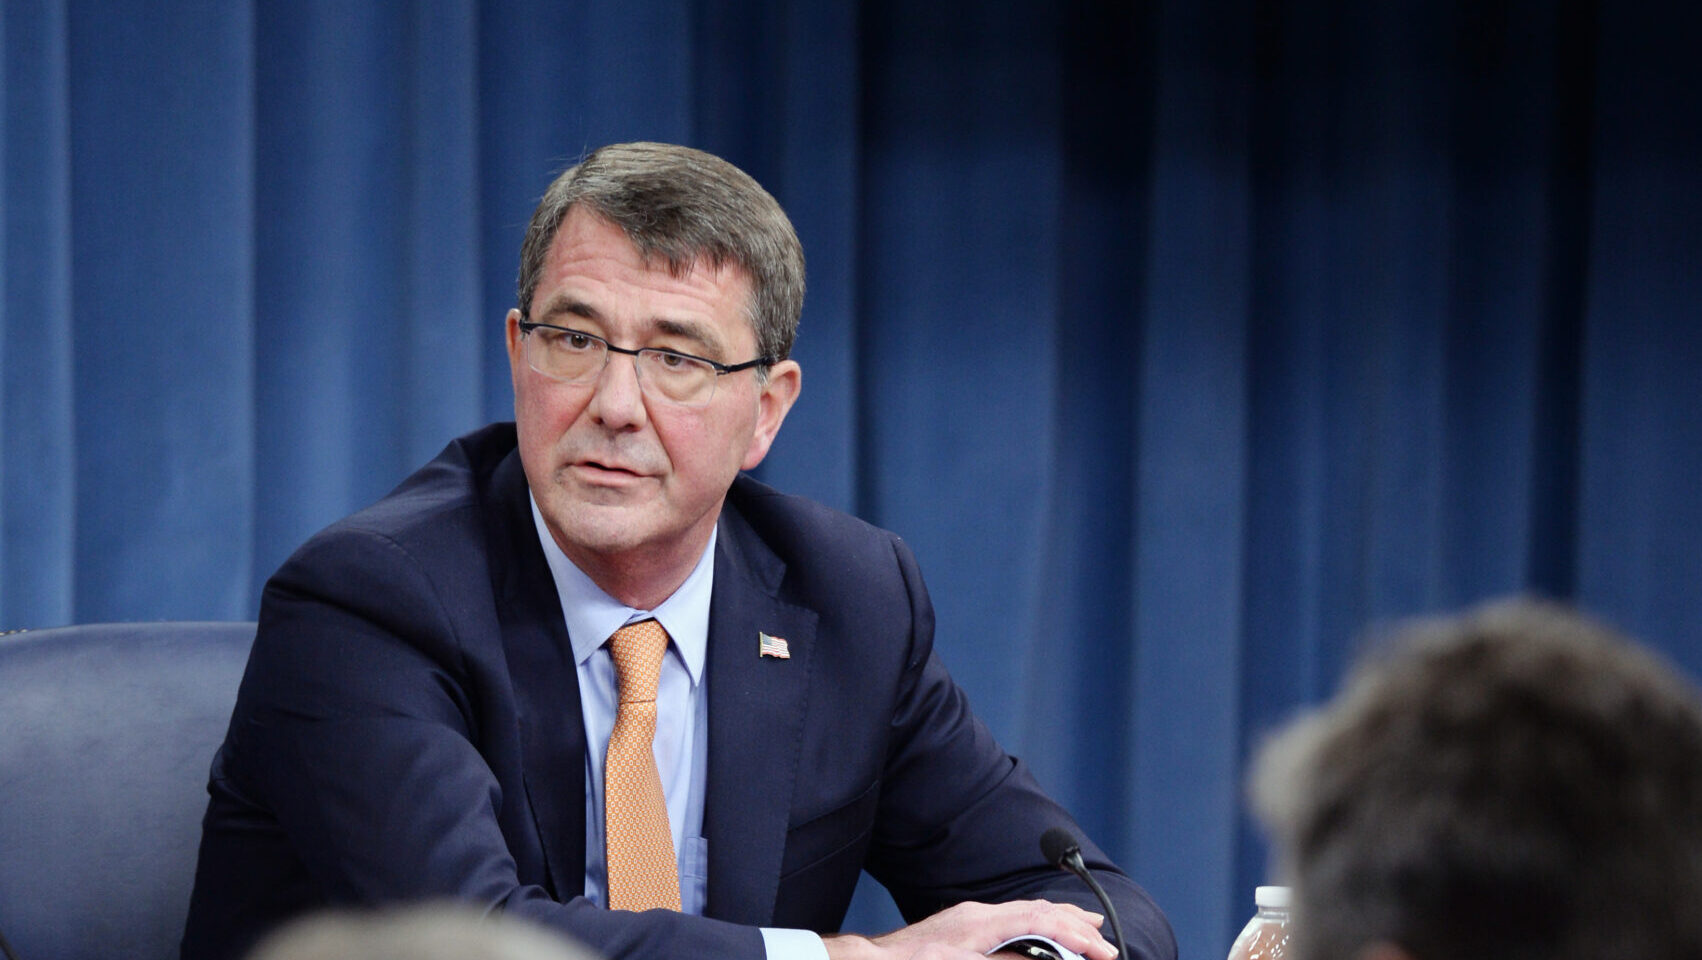 Who Is Ash Carter's Wife? Former Defense Secretary Dies At 68!